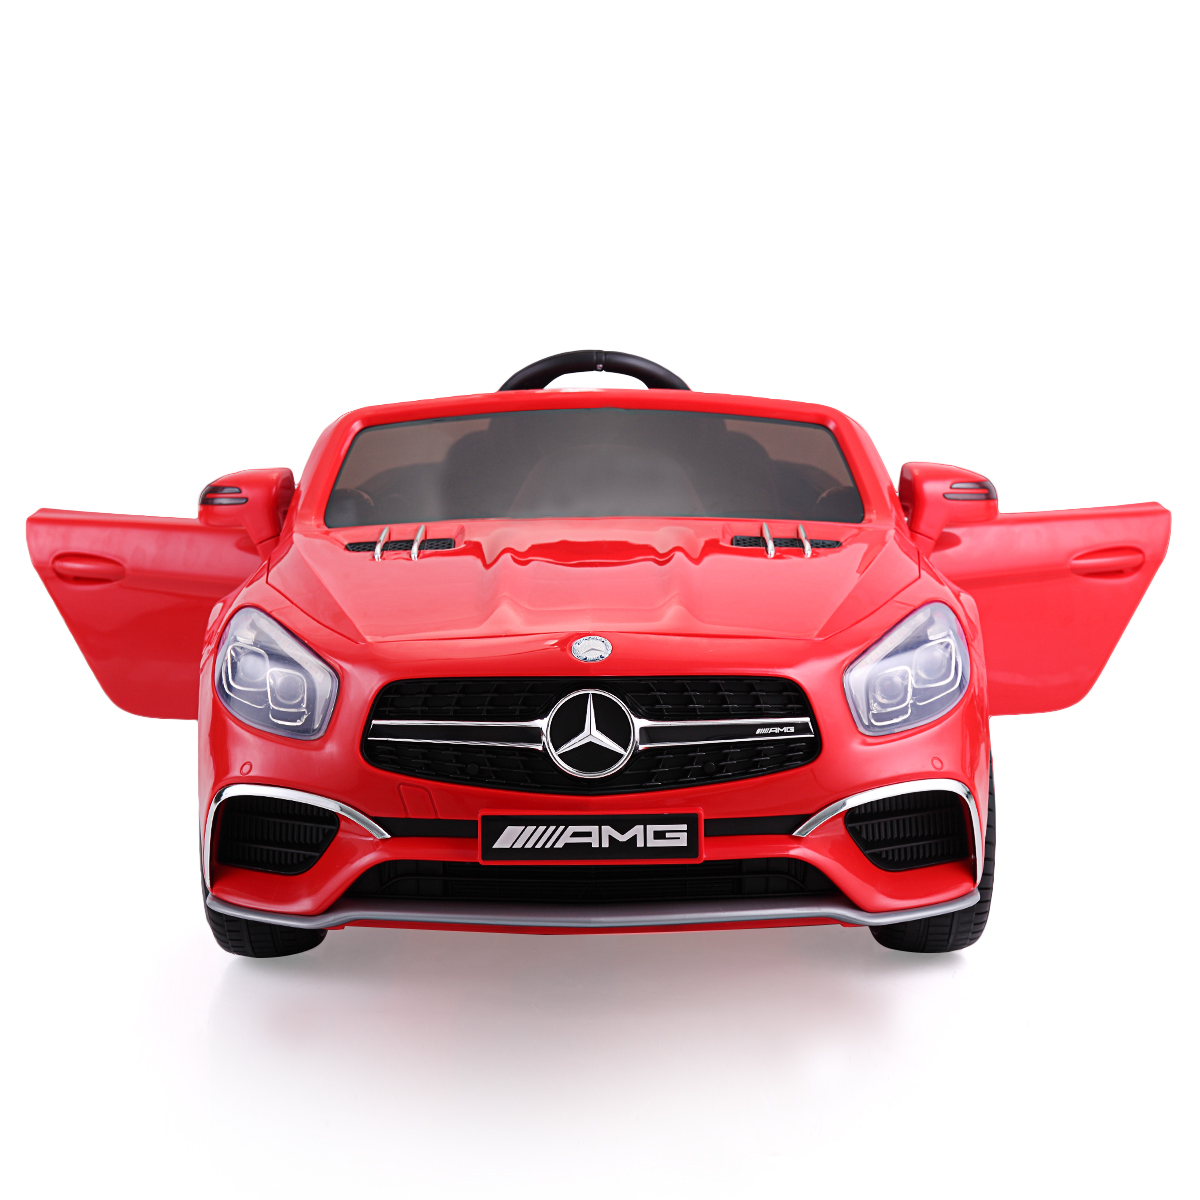 12V Mercedes-Benz Licensed Electric Kids Ride on Car, Battery Powered Vehicle with LED Lights, Music, USB, MP3, Spring-Suspension RC 4-Wheeler, Red-Boyel Living